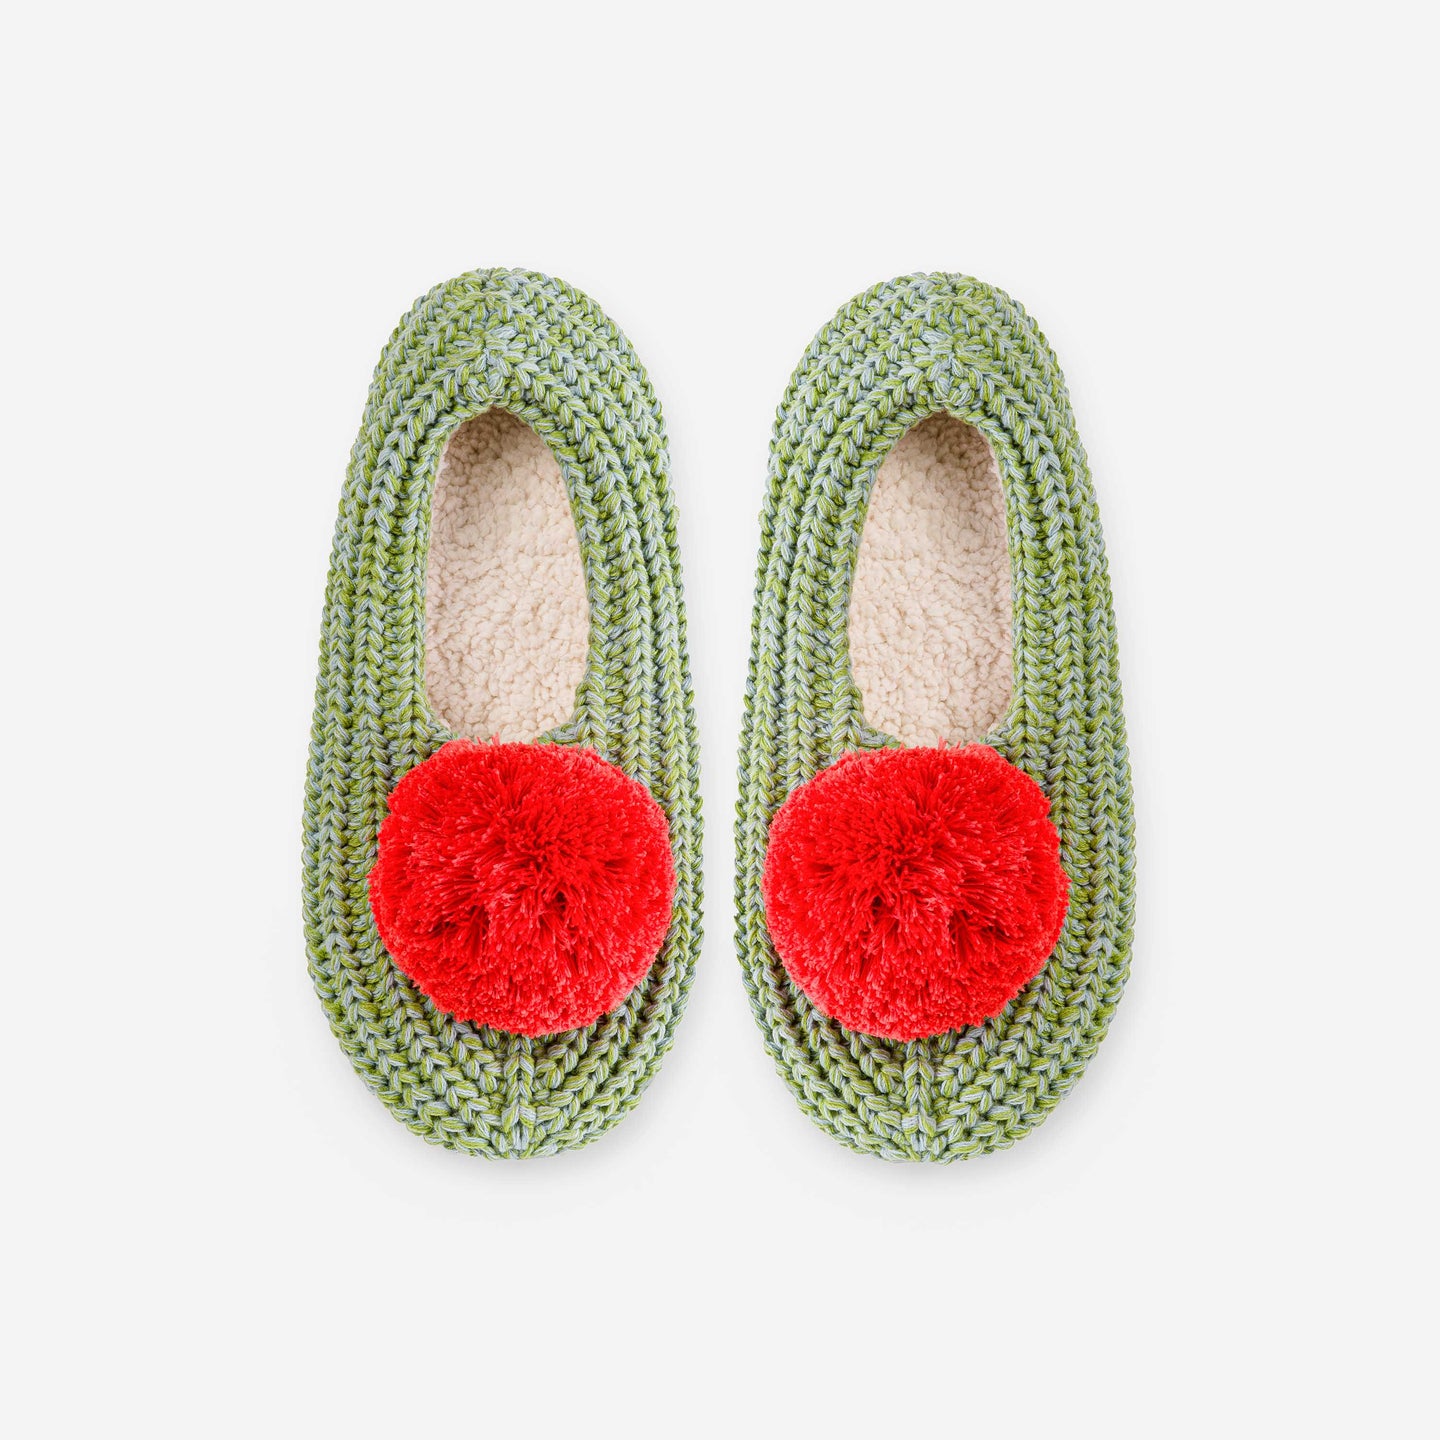 Pom Knit Colorful Sock Slippers Yarn Knitted Cozy